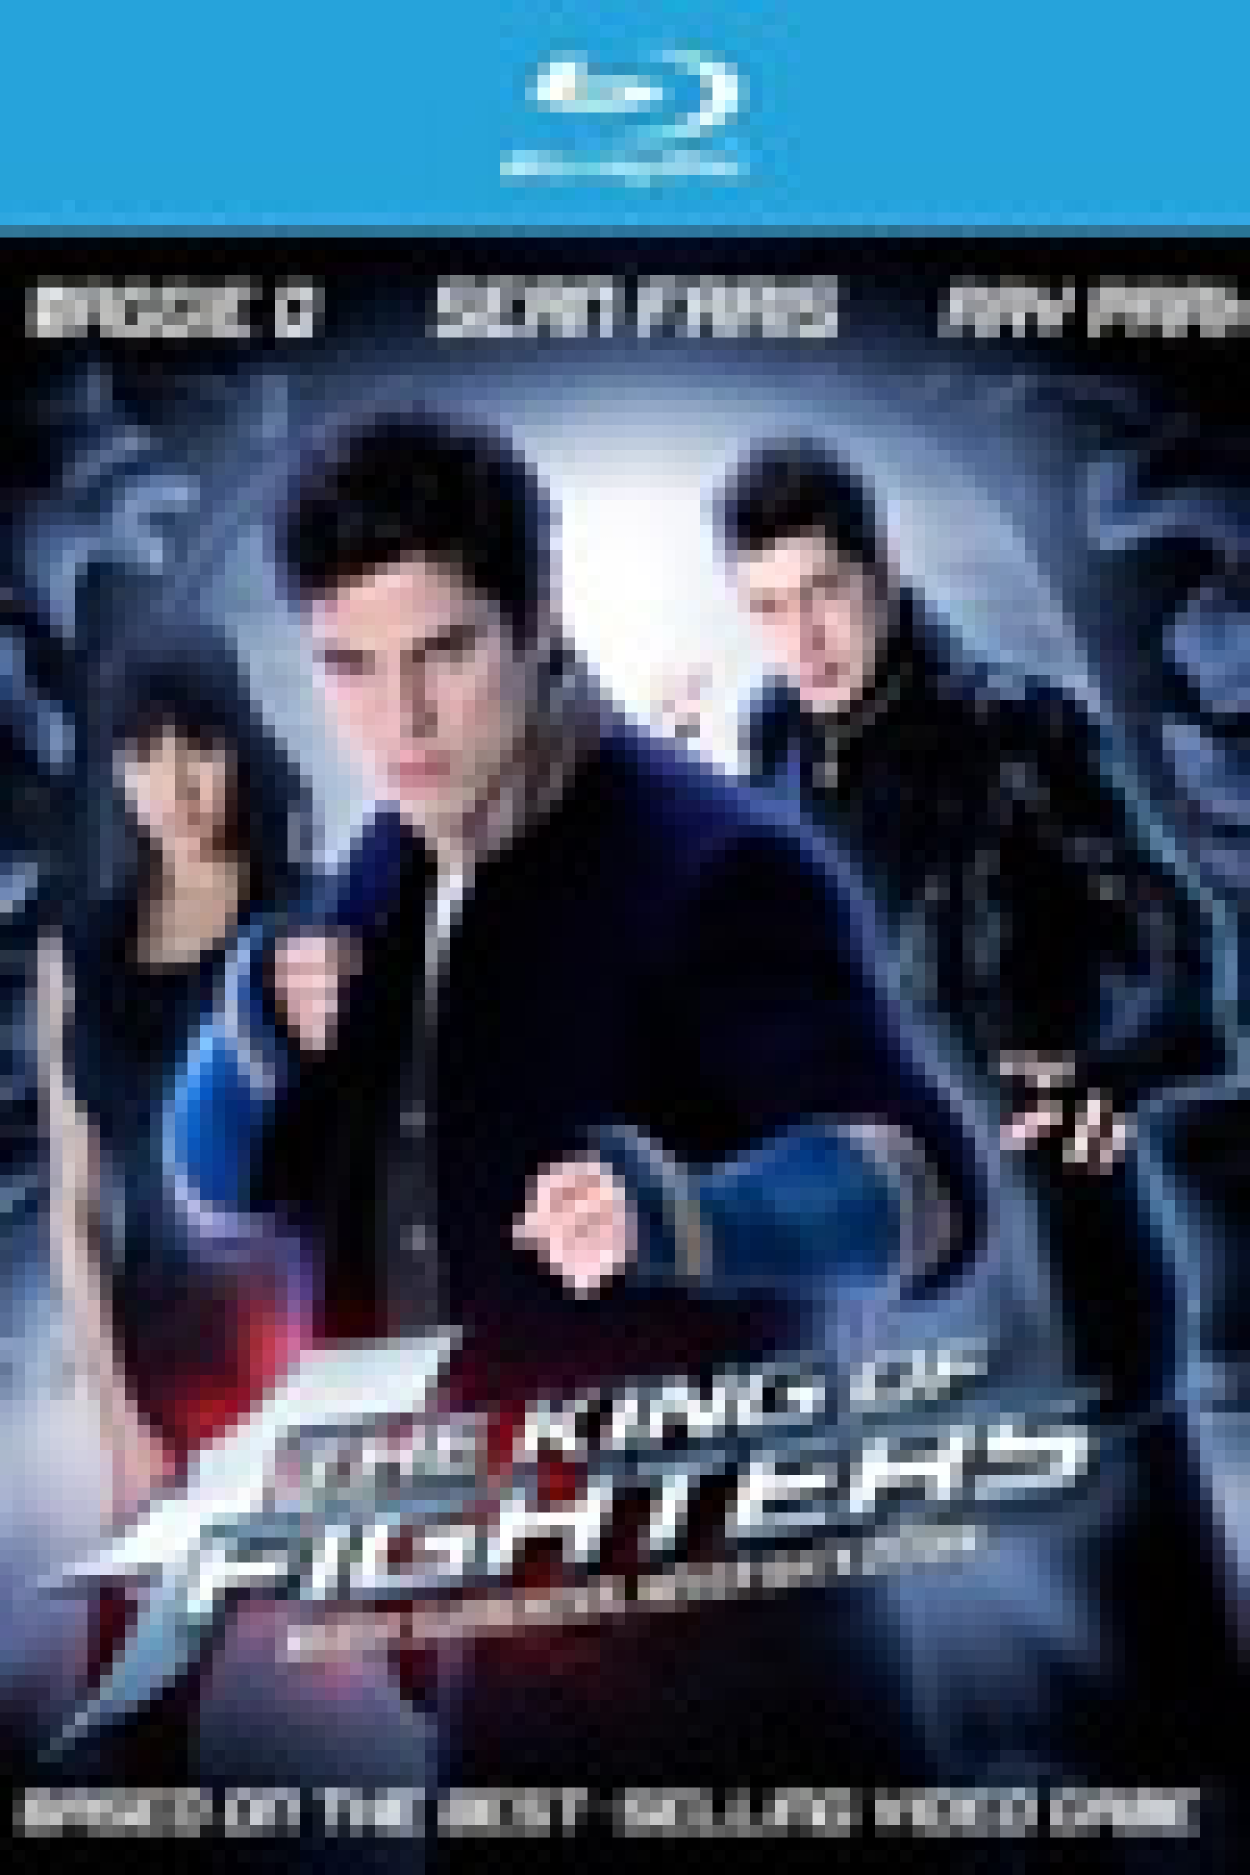 The King of Fighters (Filme), Trailer, Sinopse e Curiosidades